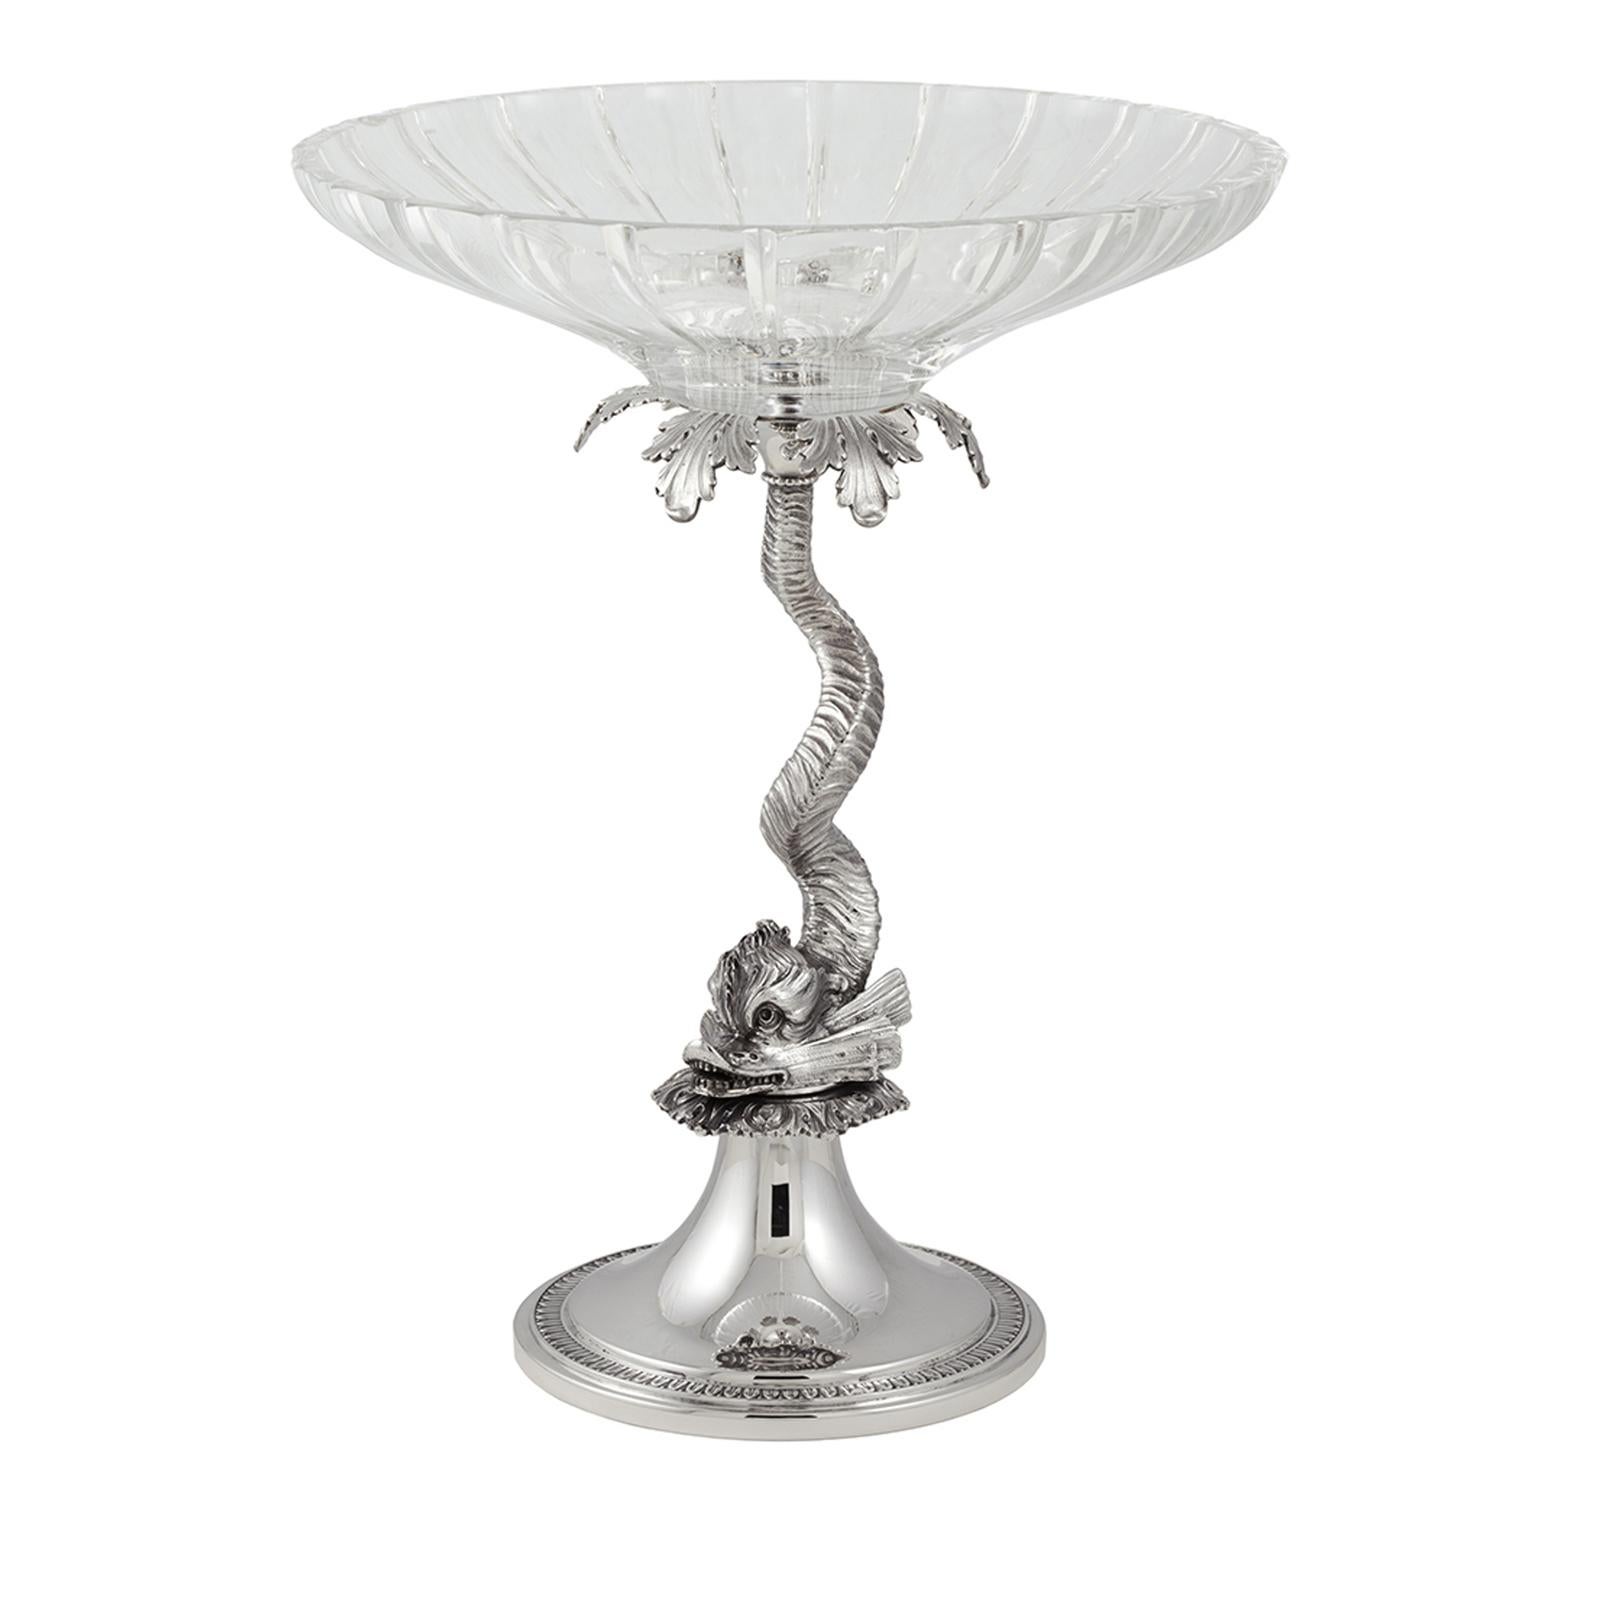 This magnificent stand can be displayed alone as centrepiece or it can support a dessert, or be paired with the Delfini caviar bowl to continue the neoclassical decorative theme of the dolphin that here appears in one single animal supporting the